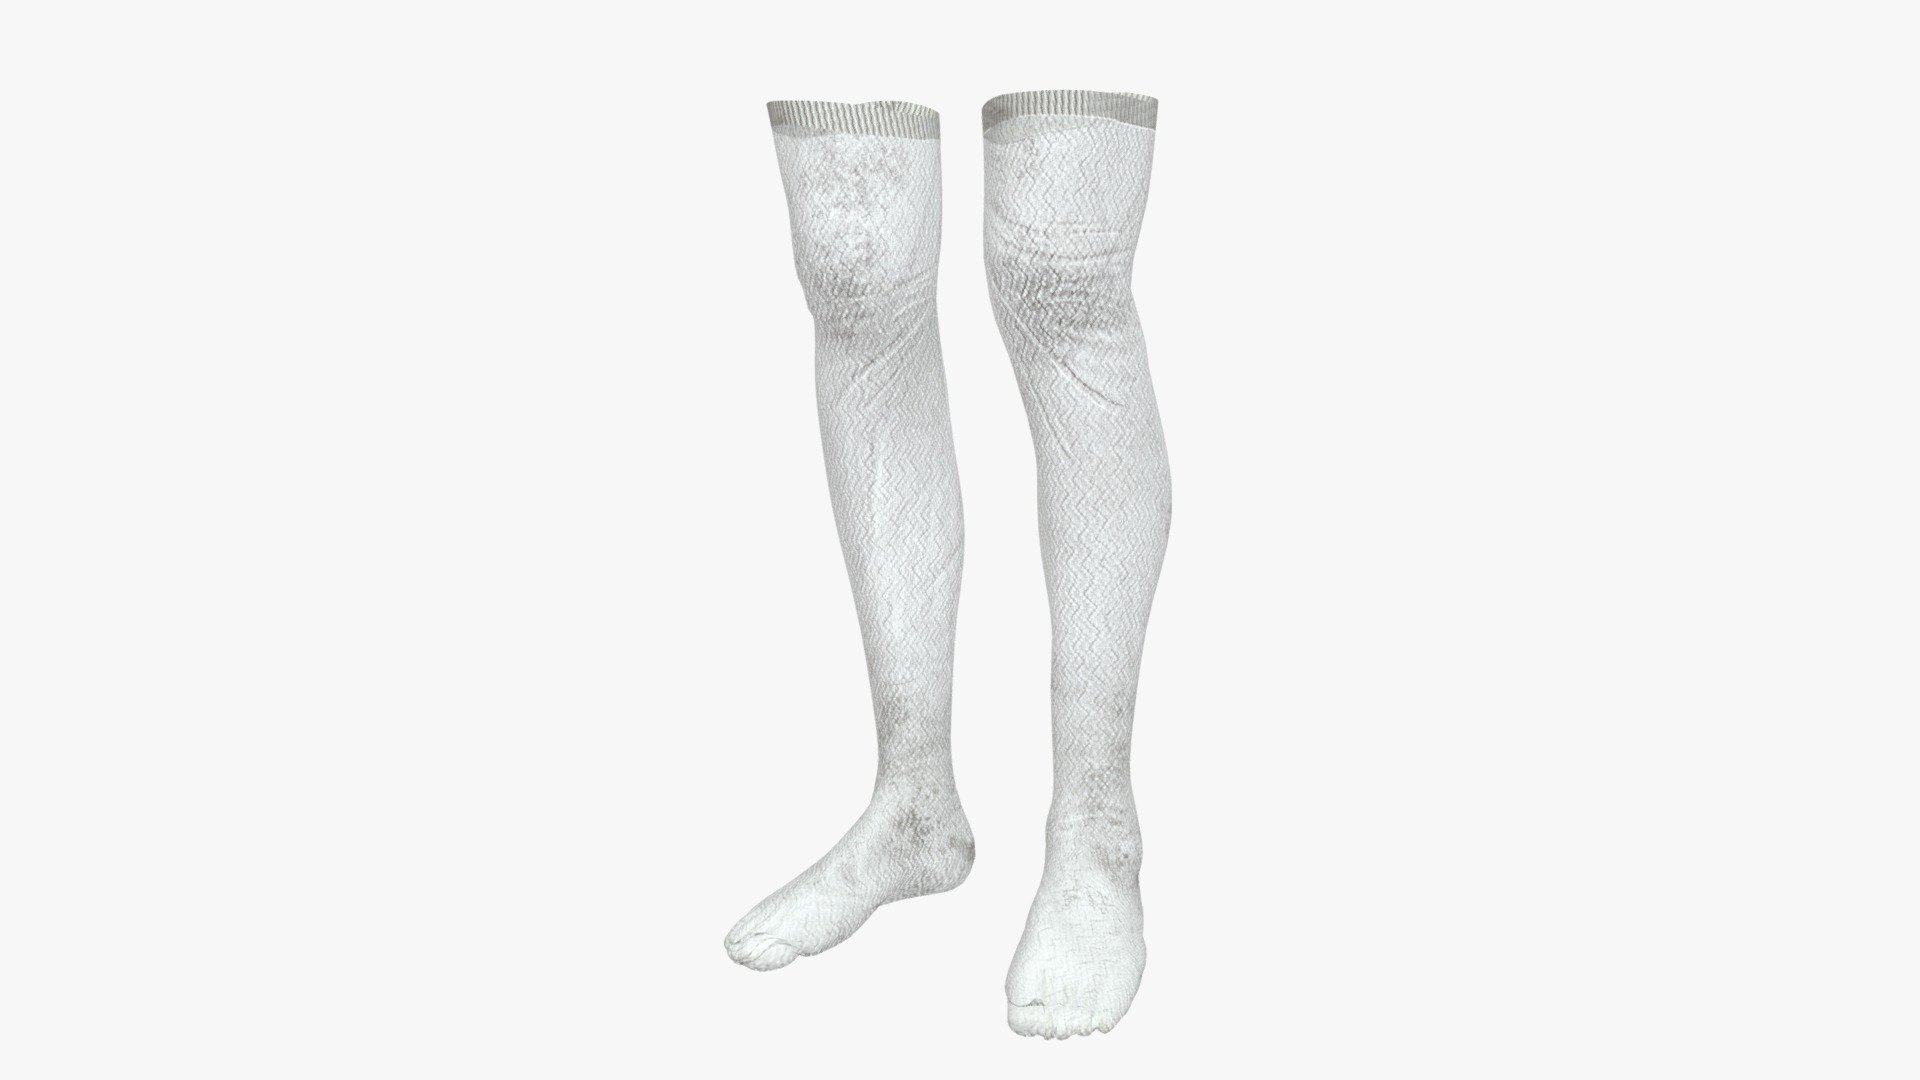 Check out my website for more products and better deals! &amp;gt;&amp;gt; SM5 by Heledahn &amp;lt;&amp;lt;

This is a digital 3d model of a pair of Long White Cotton Socks or stockings, made with a beautiful zigzag lacework. The socks are weathered and dirty from the road and the field, and they are knitted around the thighs to stay in place. (Not historically accurate, probably). These socks look beautiful in convination with the Medieval Peasant Leather Shoes I have in store.

This model can be used for any Medieval/Fantasy themed render project, used either as a background prop, or as a closeup prop due to its high detail and visual quality.

This product will achieve realistic results in your rendering projects and animations, being greatly suited for close-ups due to their high quality topology and PBR shading 3d model